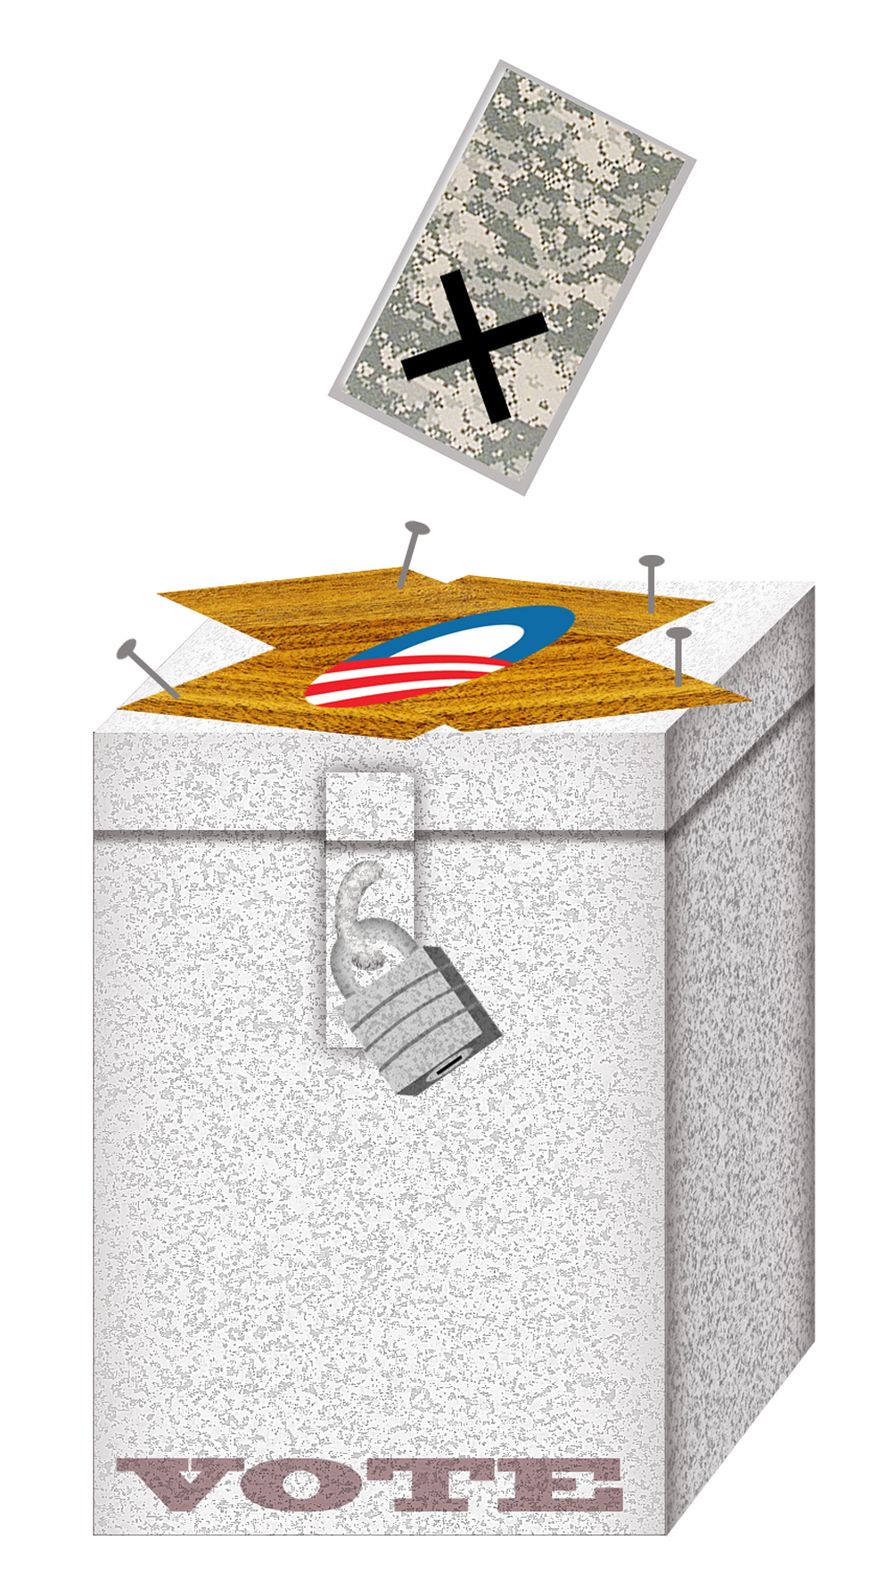 Illustration Military Votes by Alexander Hunter for The Washington Times